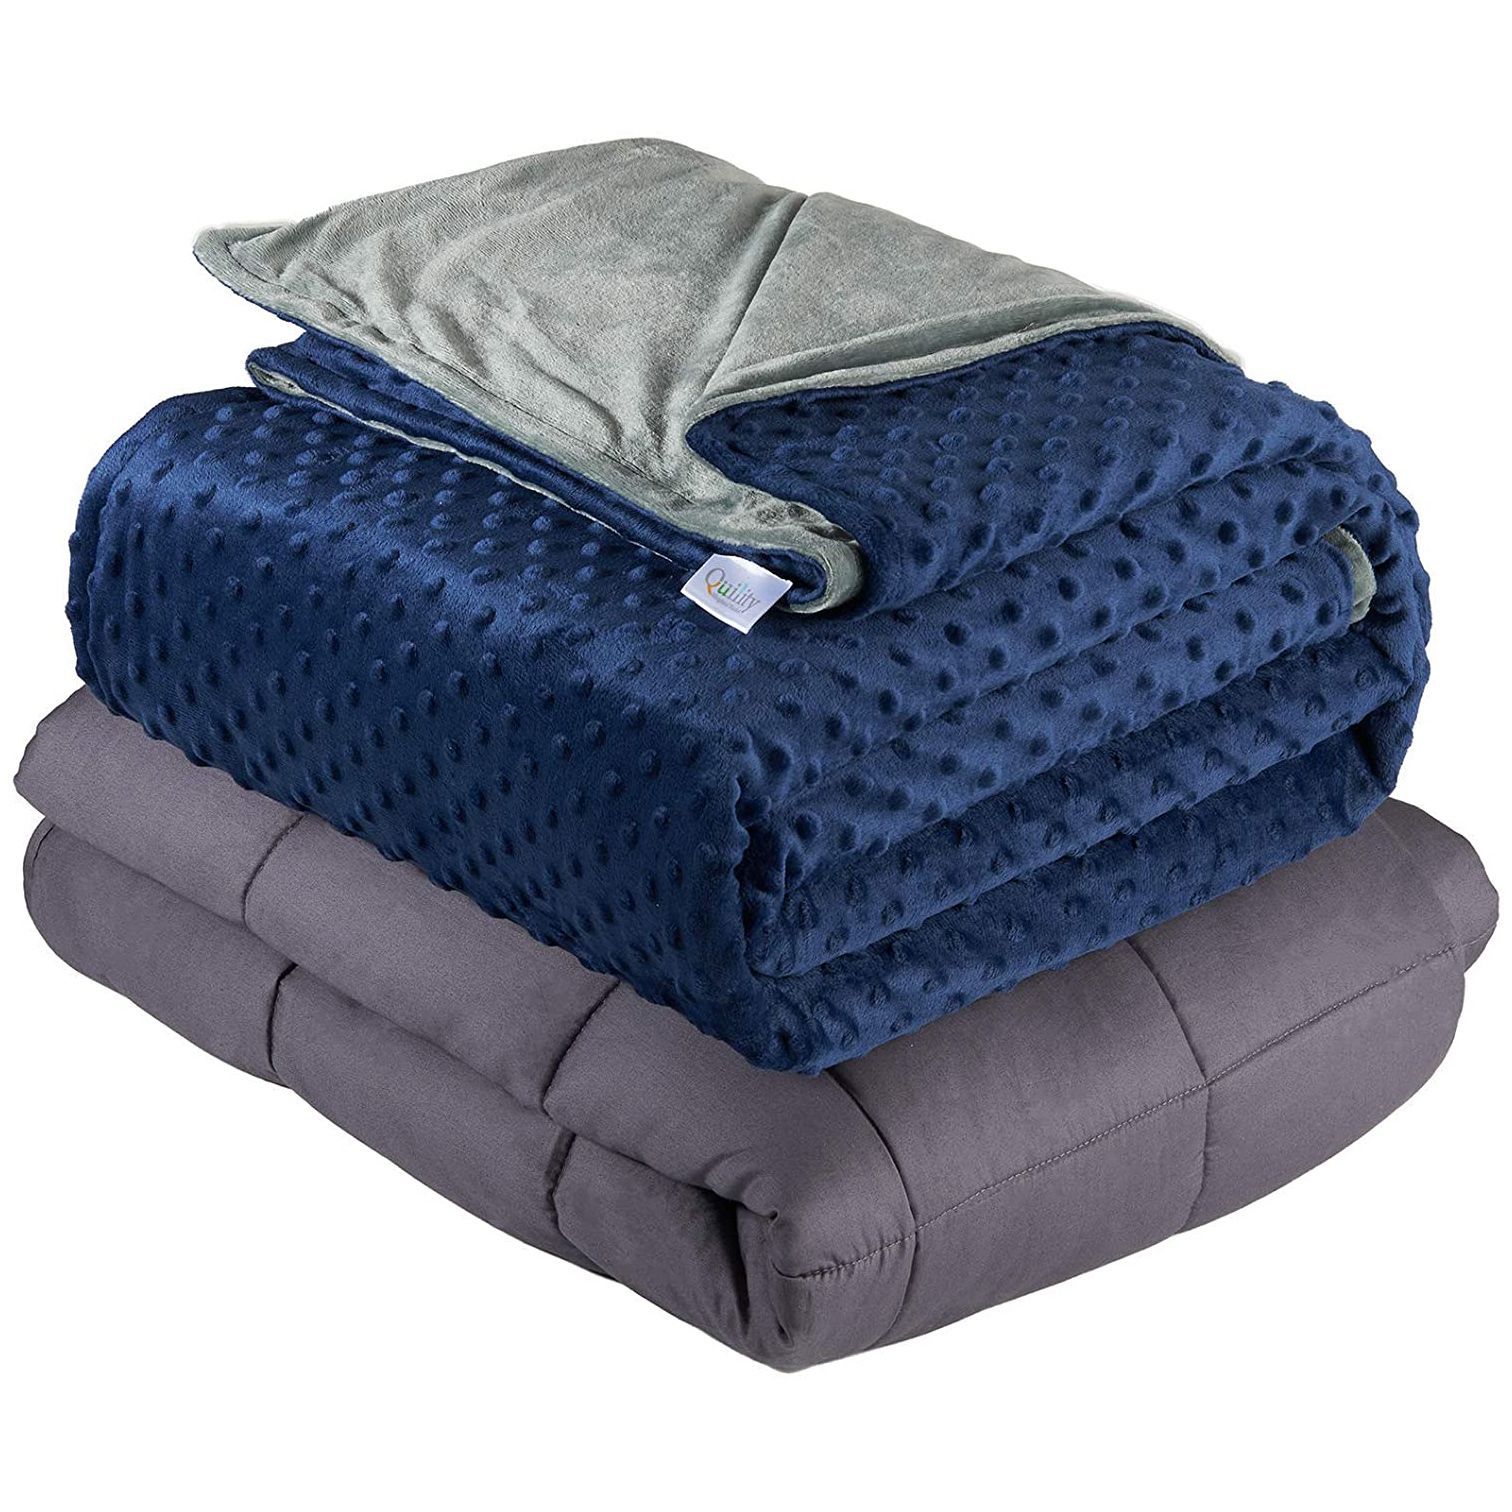 PONFE Weighted Blanket 100% Cotton Weighted Throw Blanket 15lbs. 